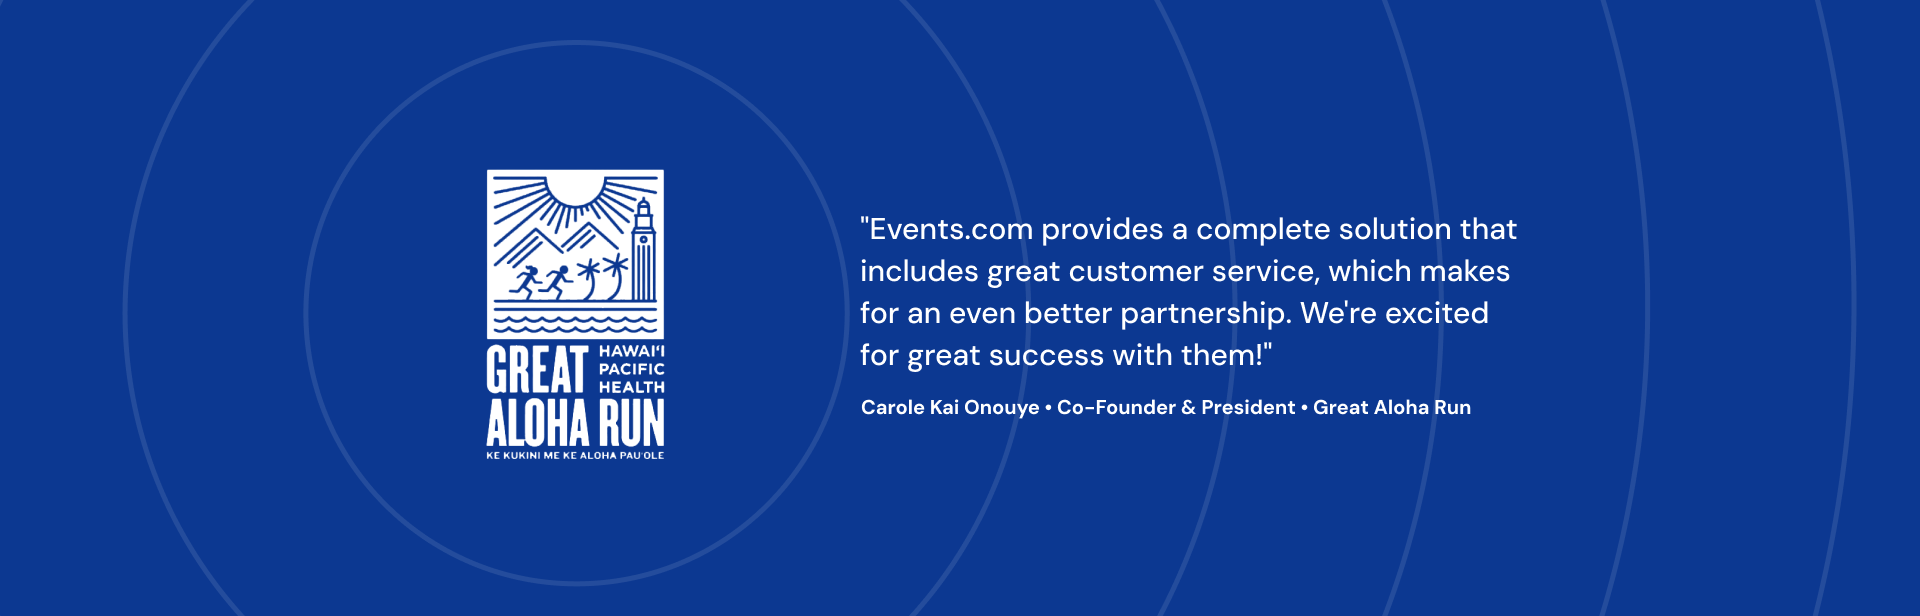 Events.com provides a complete solution that includes great customer service, which makes for an even better partnership. We're excited for great success with them! Carole Kai Onouye Co-Founder & President Great Aloha Run